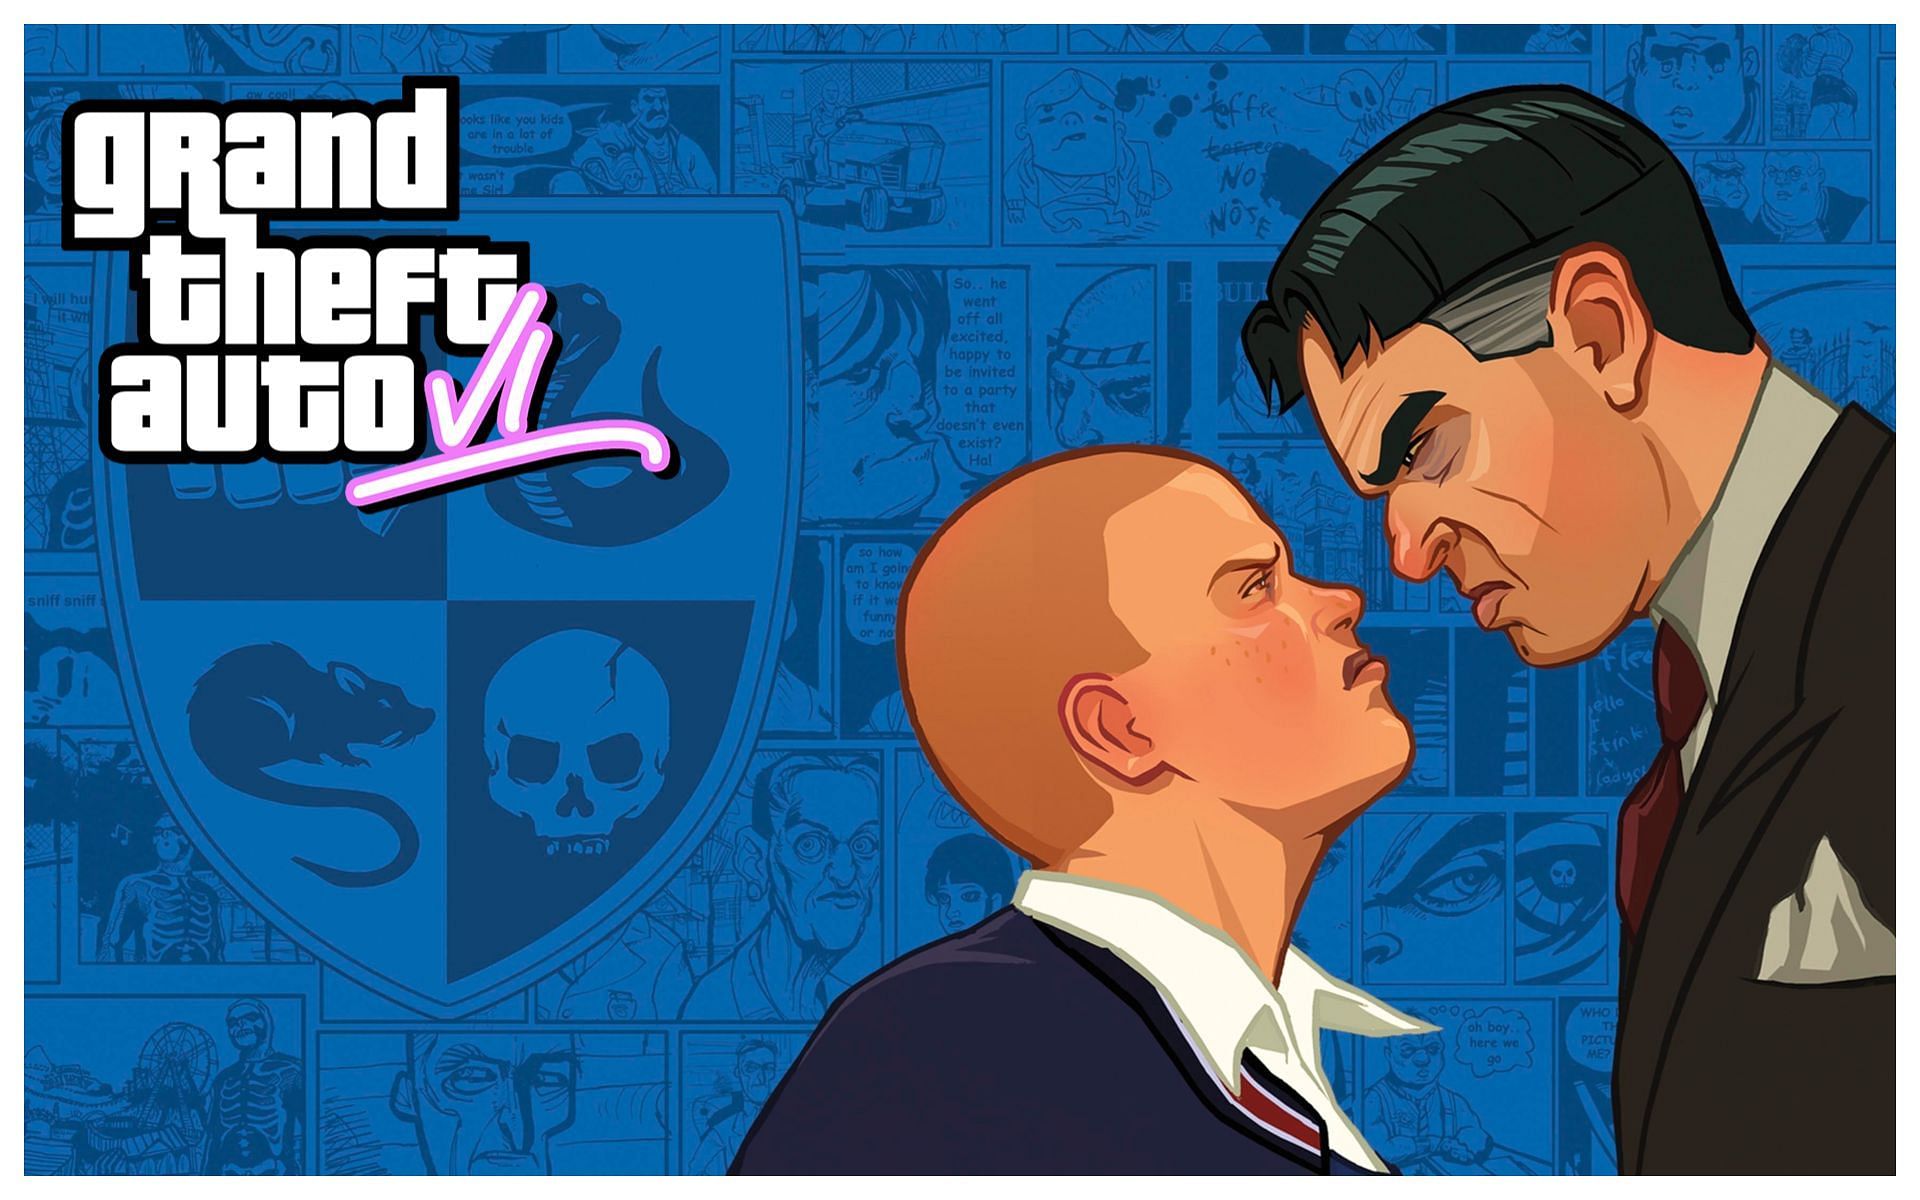 Rockstar Games Insider Says Bully 2 Could Still Happen - The Tech Game